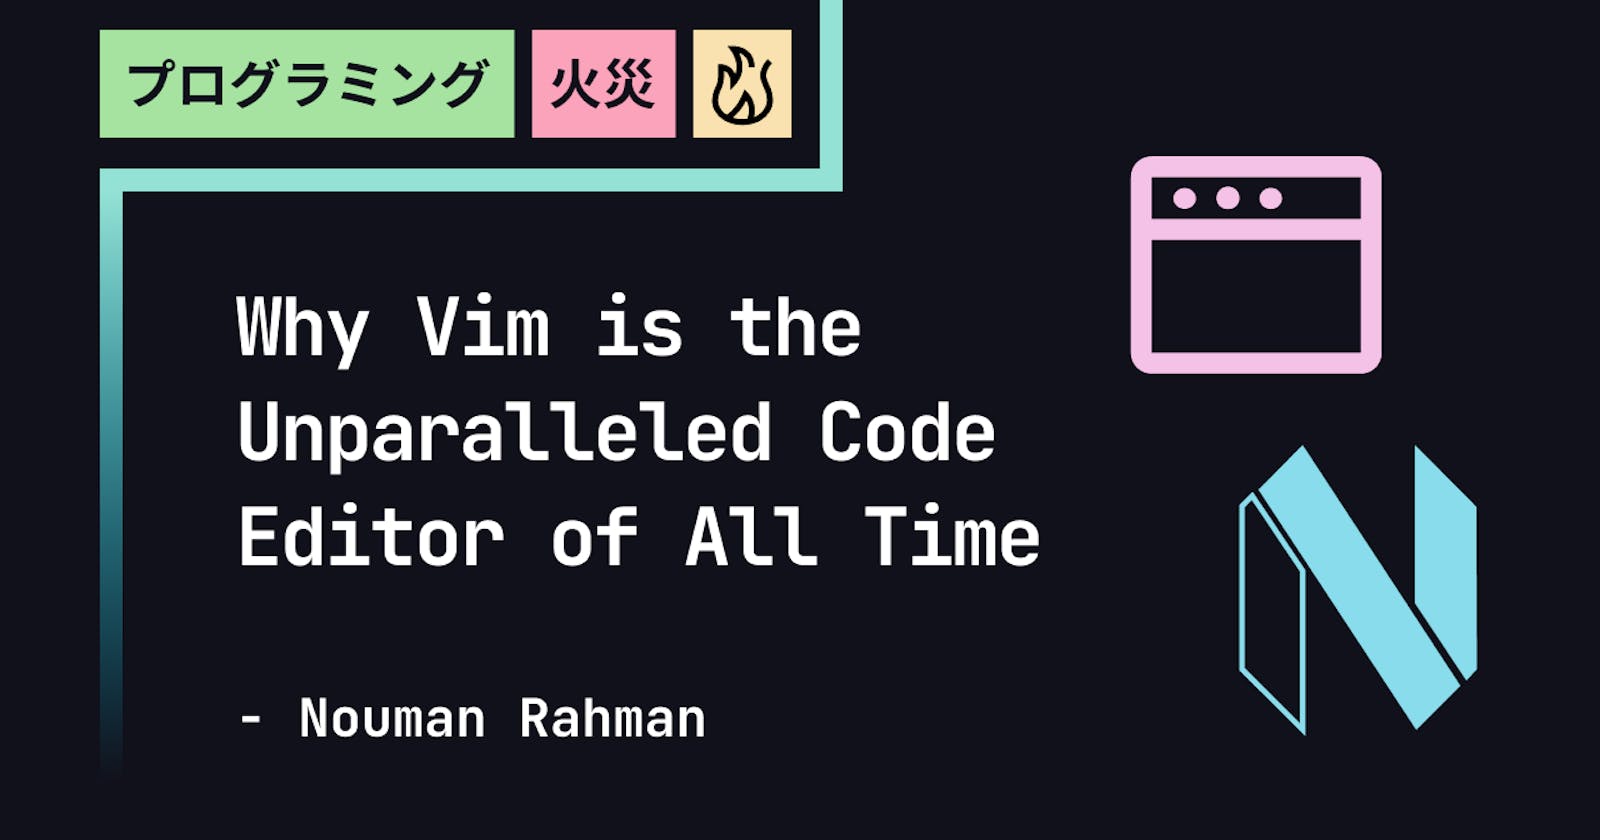 Why Vim is the Unparalleled Code Editor of All Time